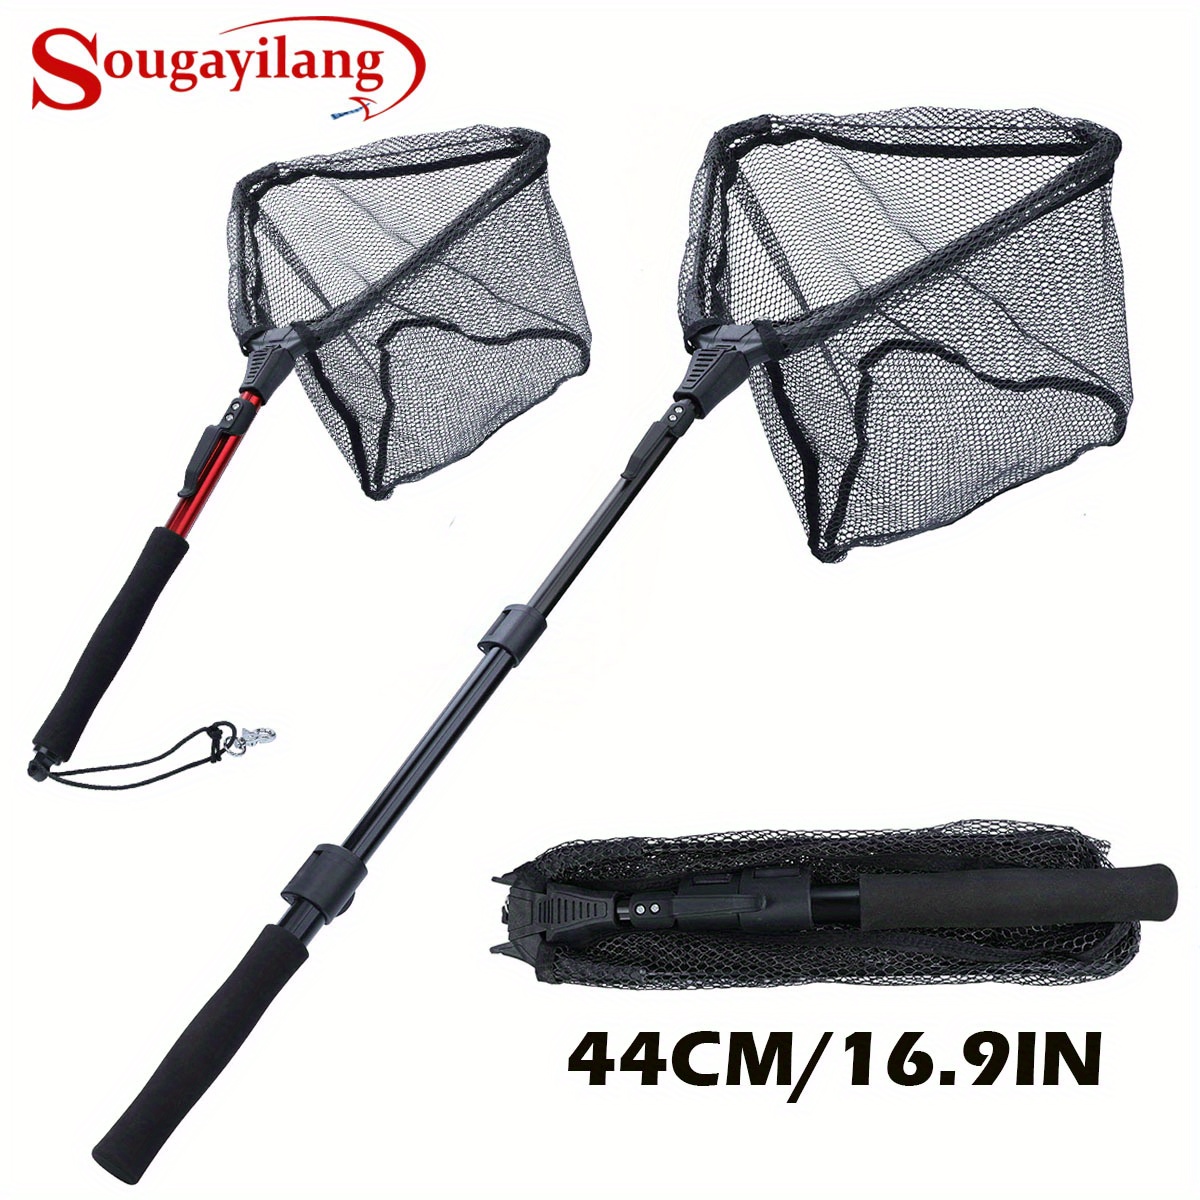 * Ultralight Telescopic Fishing Net for Kids - Aluminum Pole with  Waterproof Nylon Mesh - Perfect for Catching Minnows and Other Small Fish  Outdo